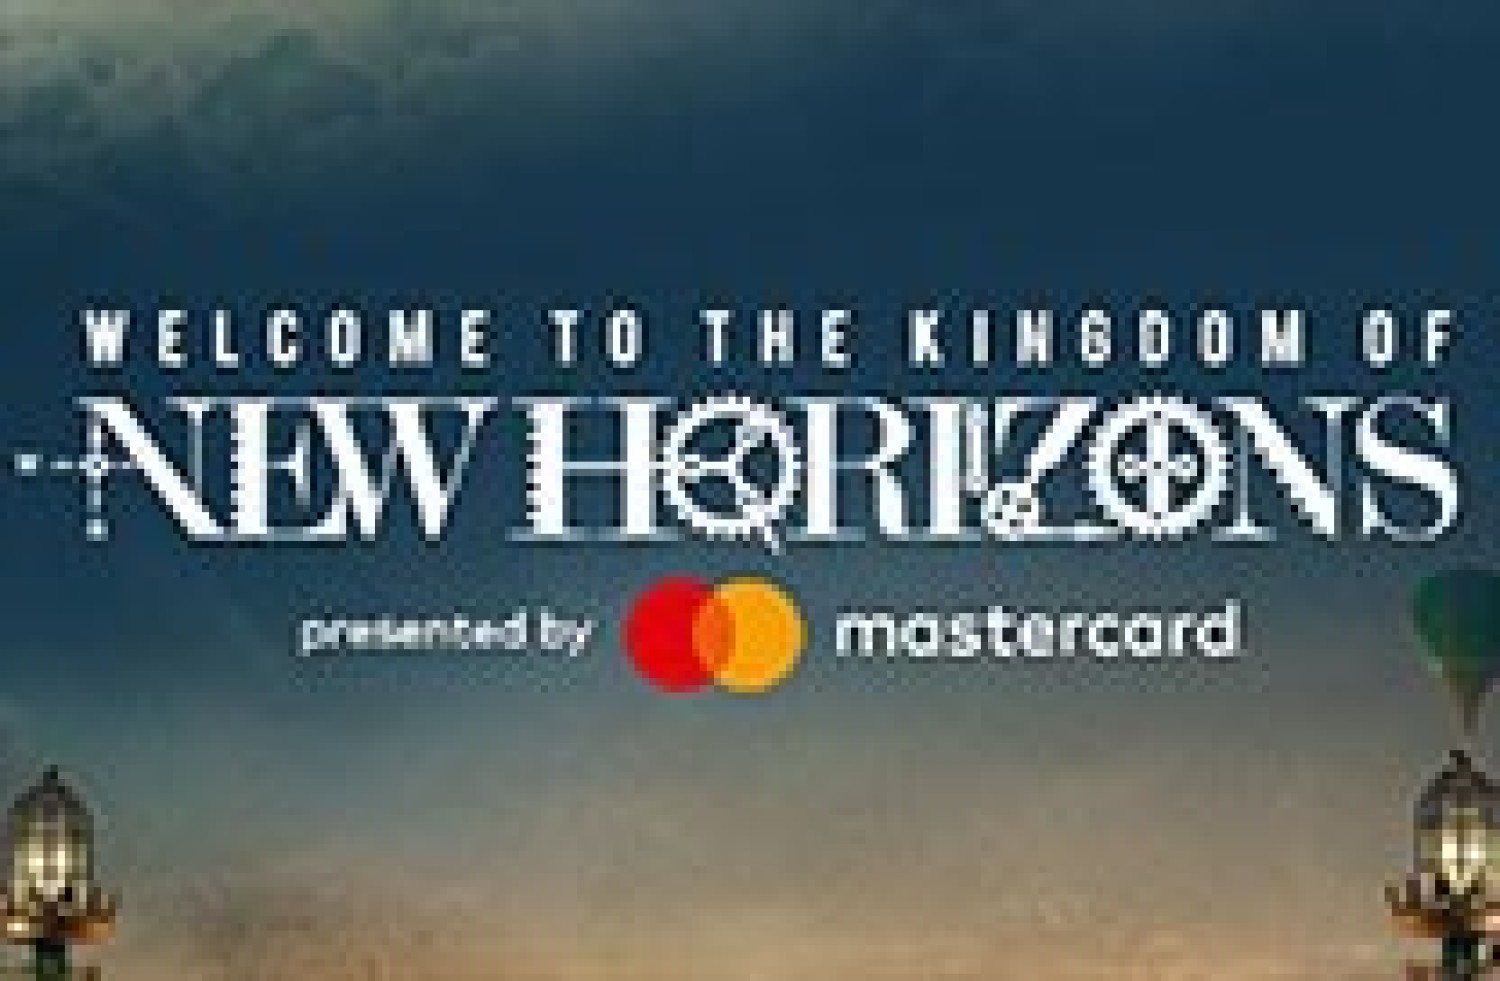 Party nieuws: World premiere for New Horizons on Nürburgring!